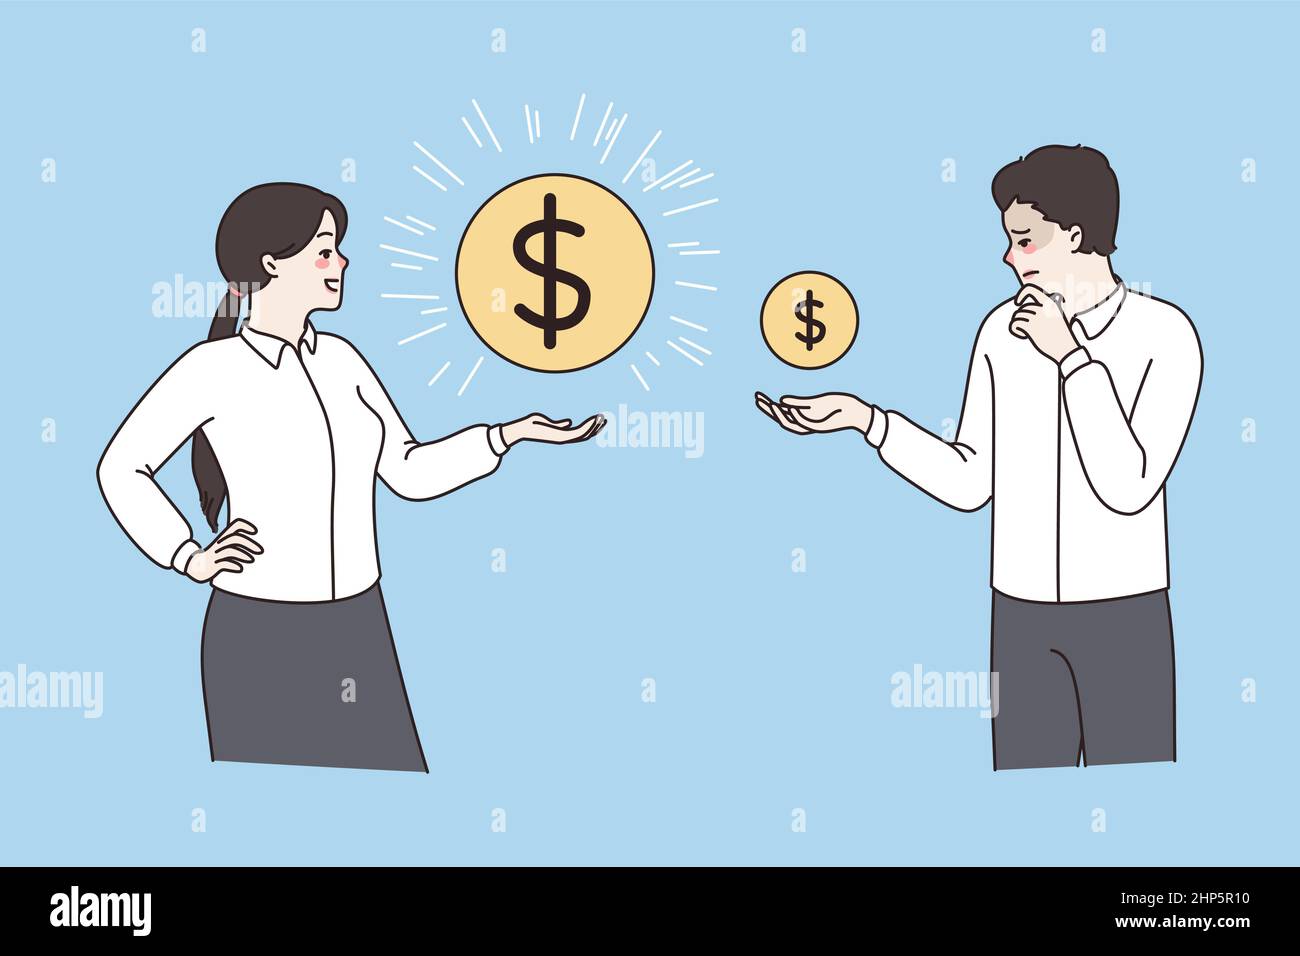 Employees with coins show salary variation Stock Vector